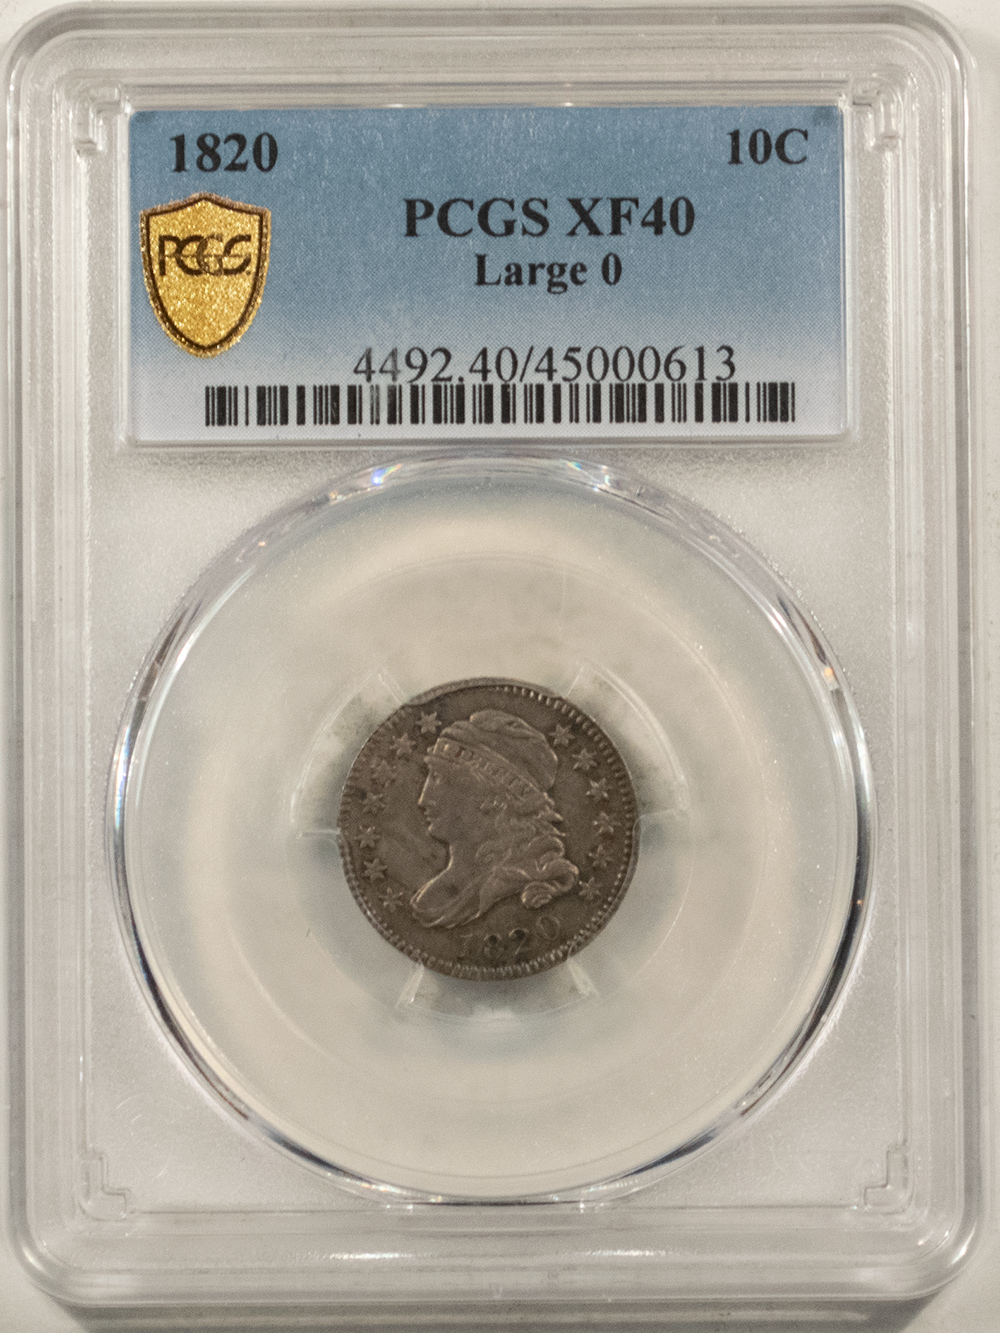 1820 CAPPED BUST DIME, LARGE 0 - PCGS XF-40, SCARCE! PRETTY!